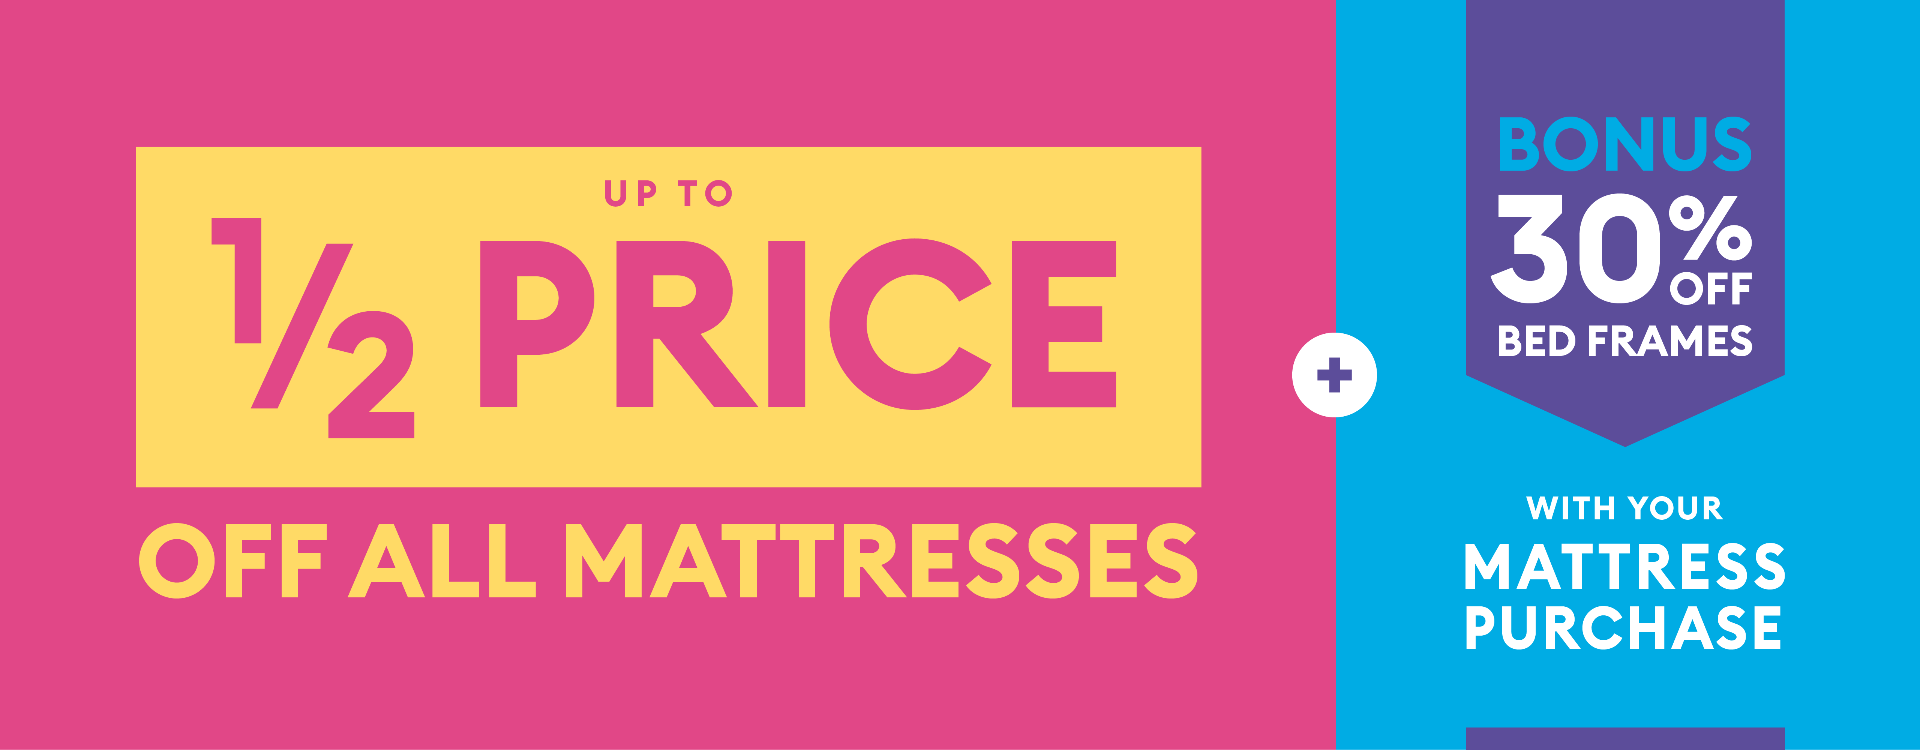 Half Price Mattress Campaign - Package Deal currently inactive